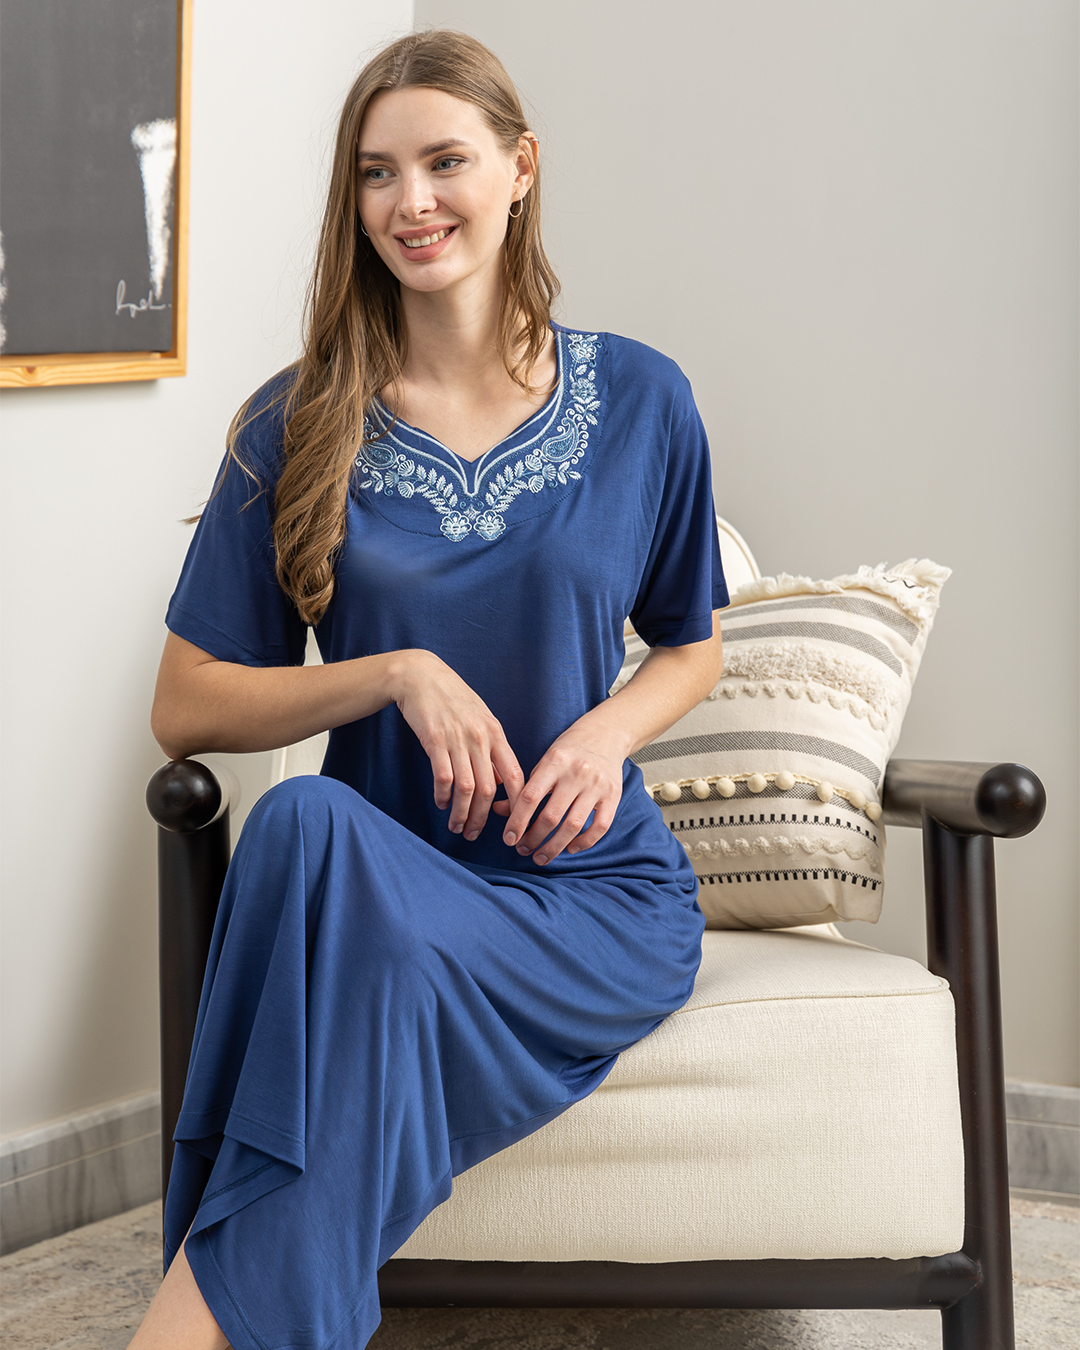 Women's half-sleeved shirt embroidered with a long rose